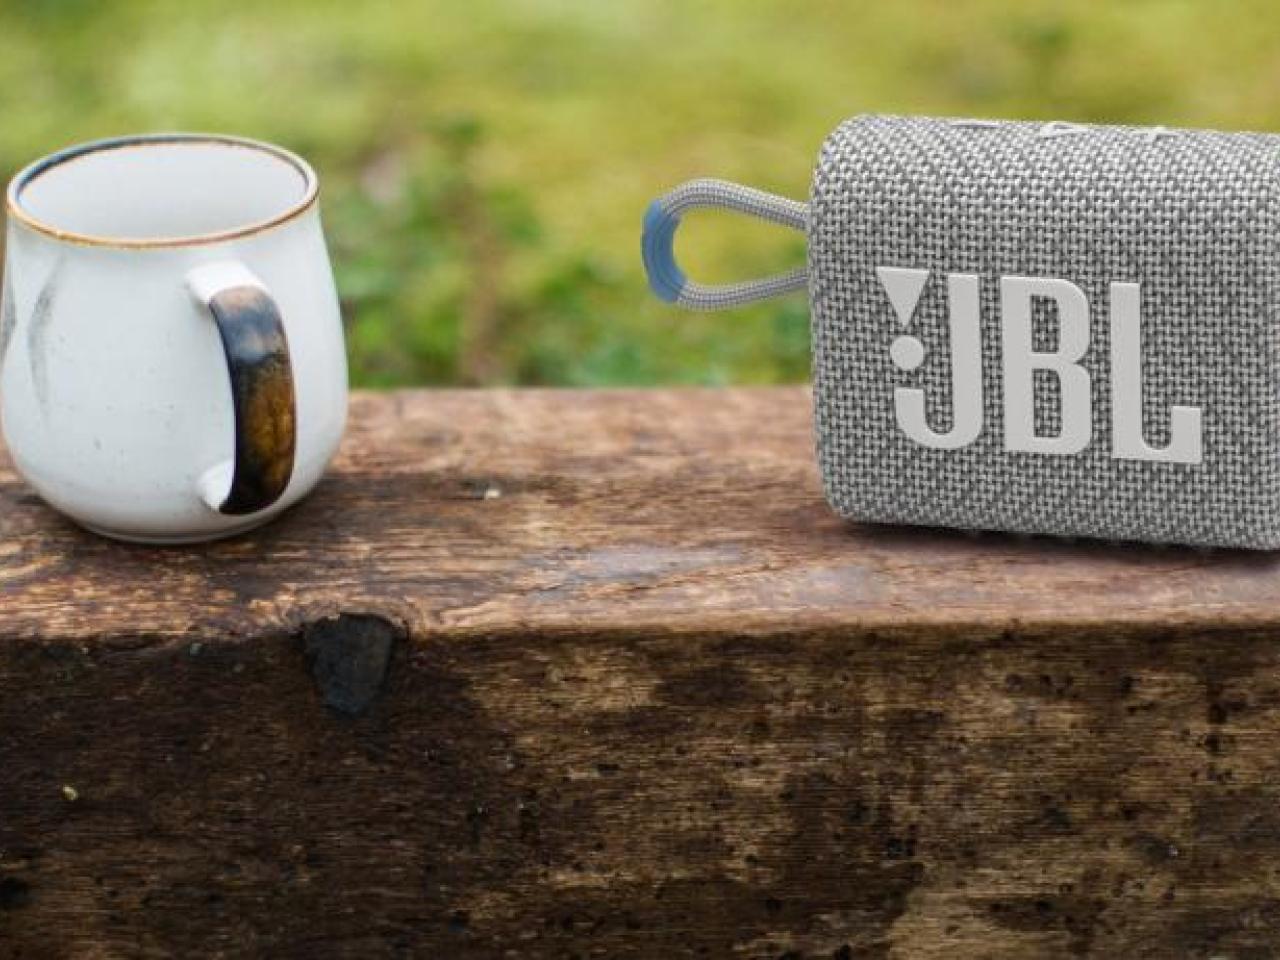 Coffee cup and JBL speaker shown in a grassy field.